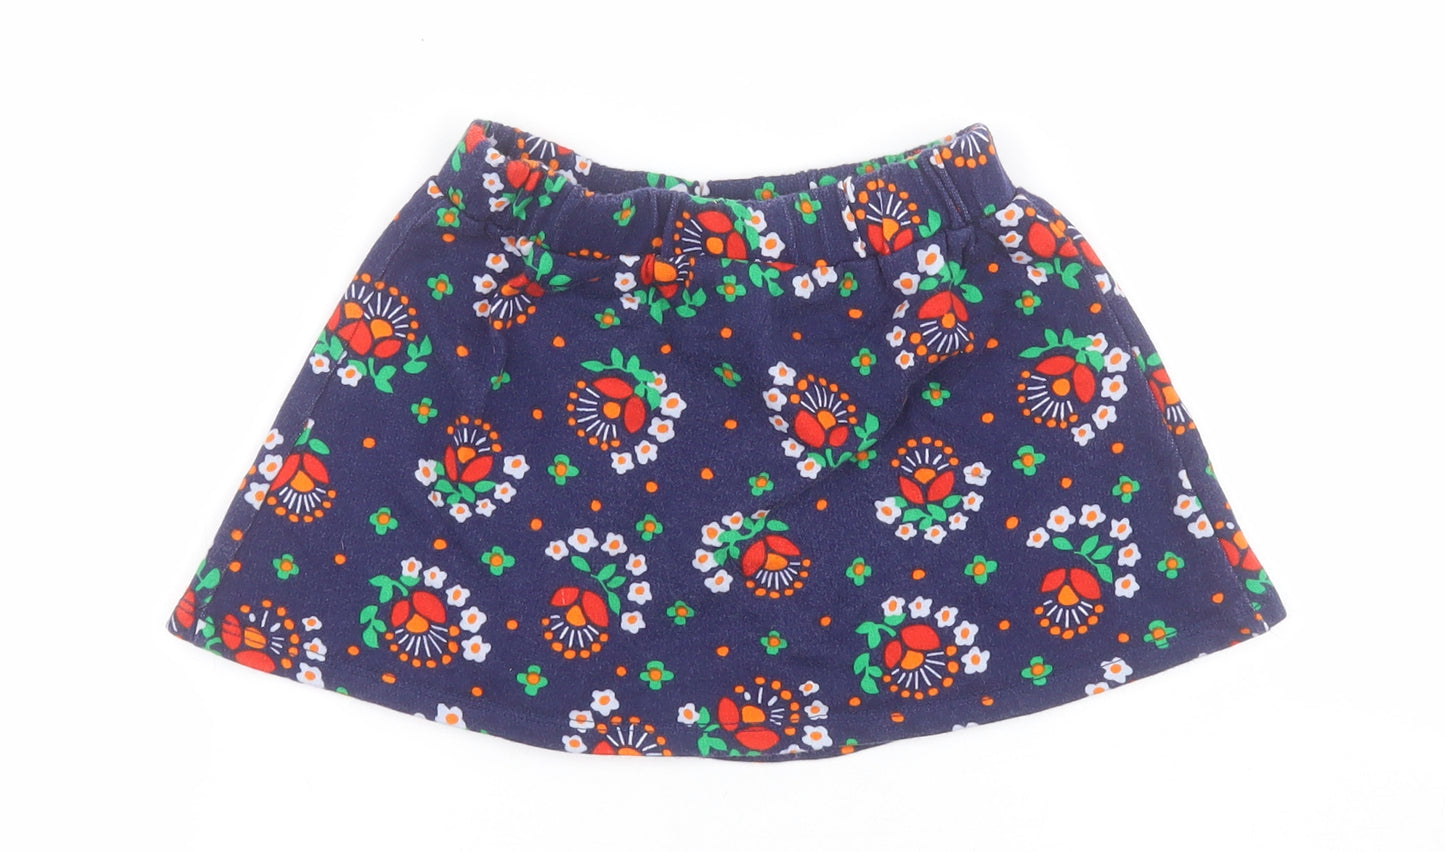 Tuc Tuc Kids Girls Blue Floral Cotton A-Line Skirt Size 6 Years  Regular Pull On